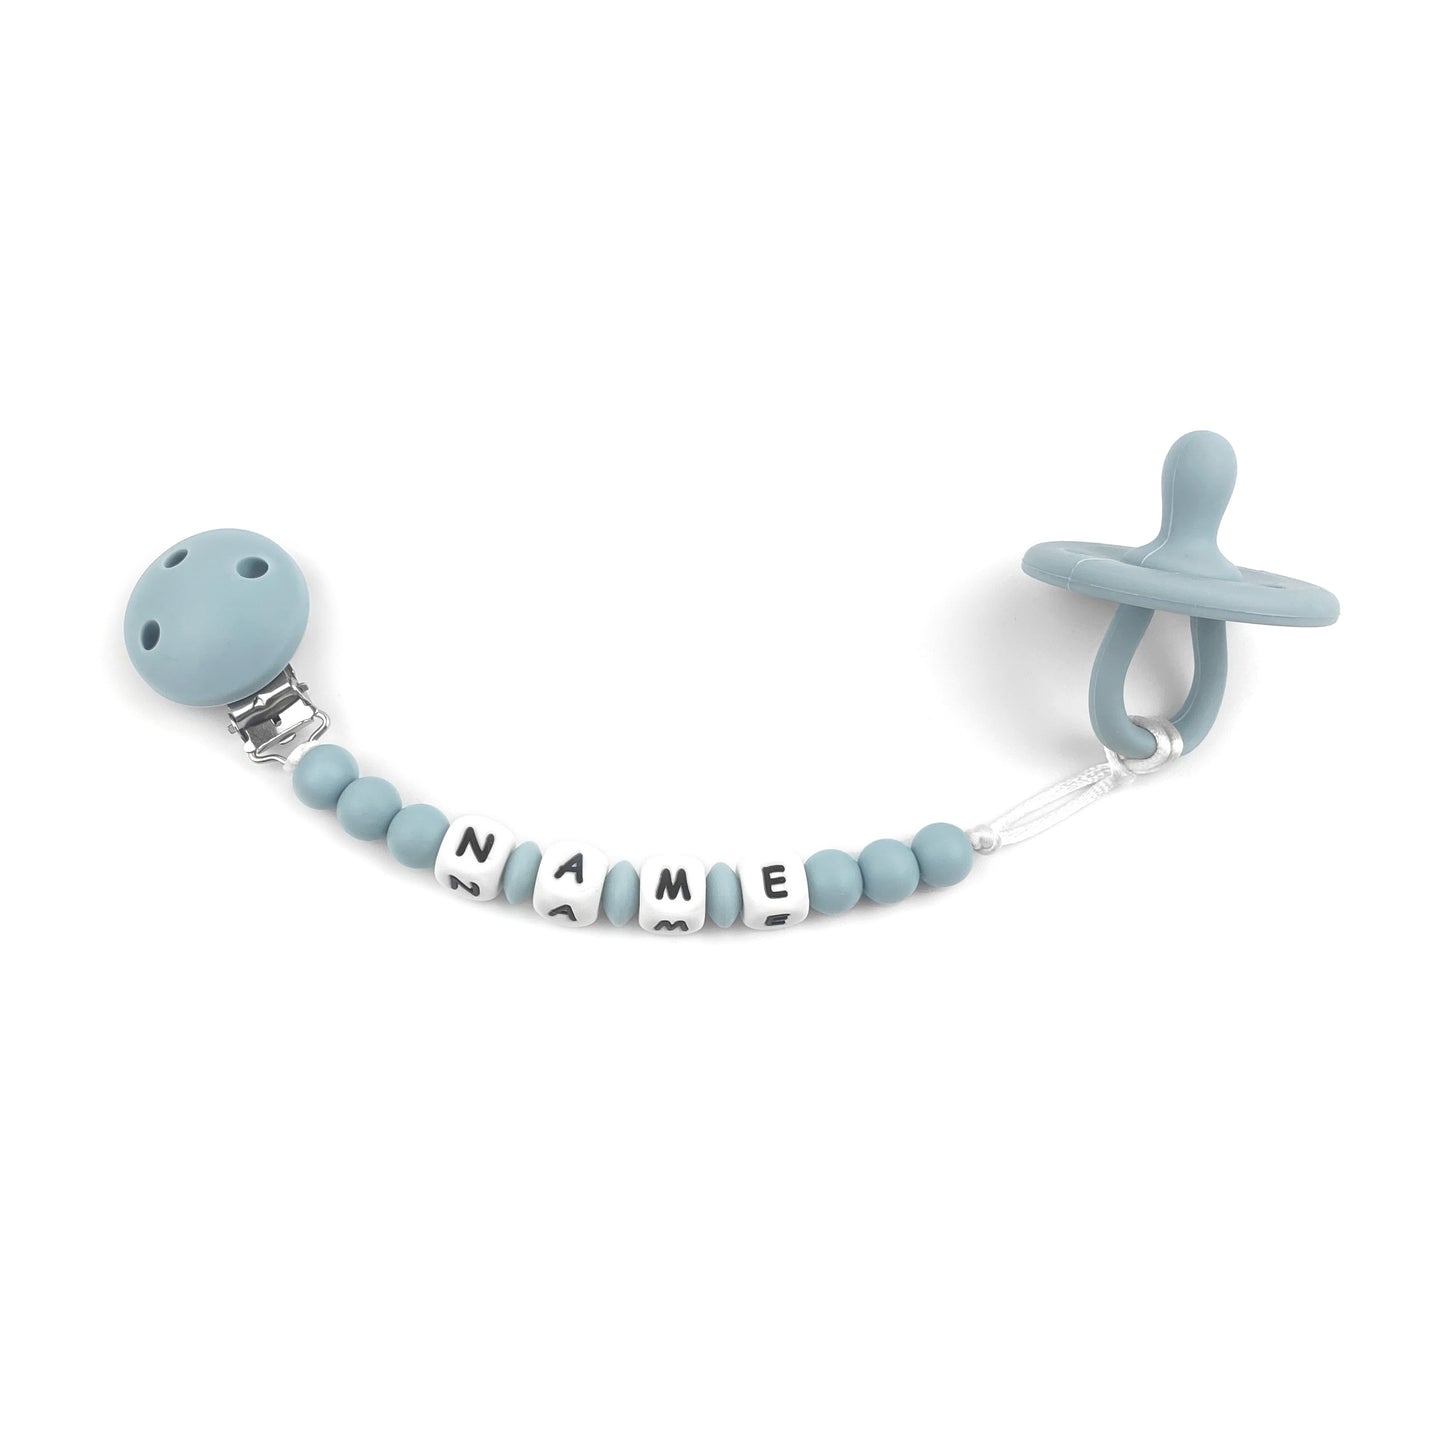 Plain chain with pacifier